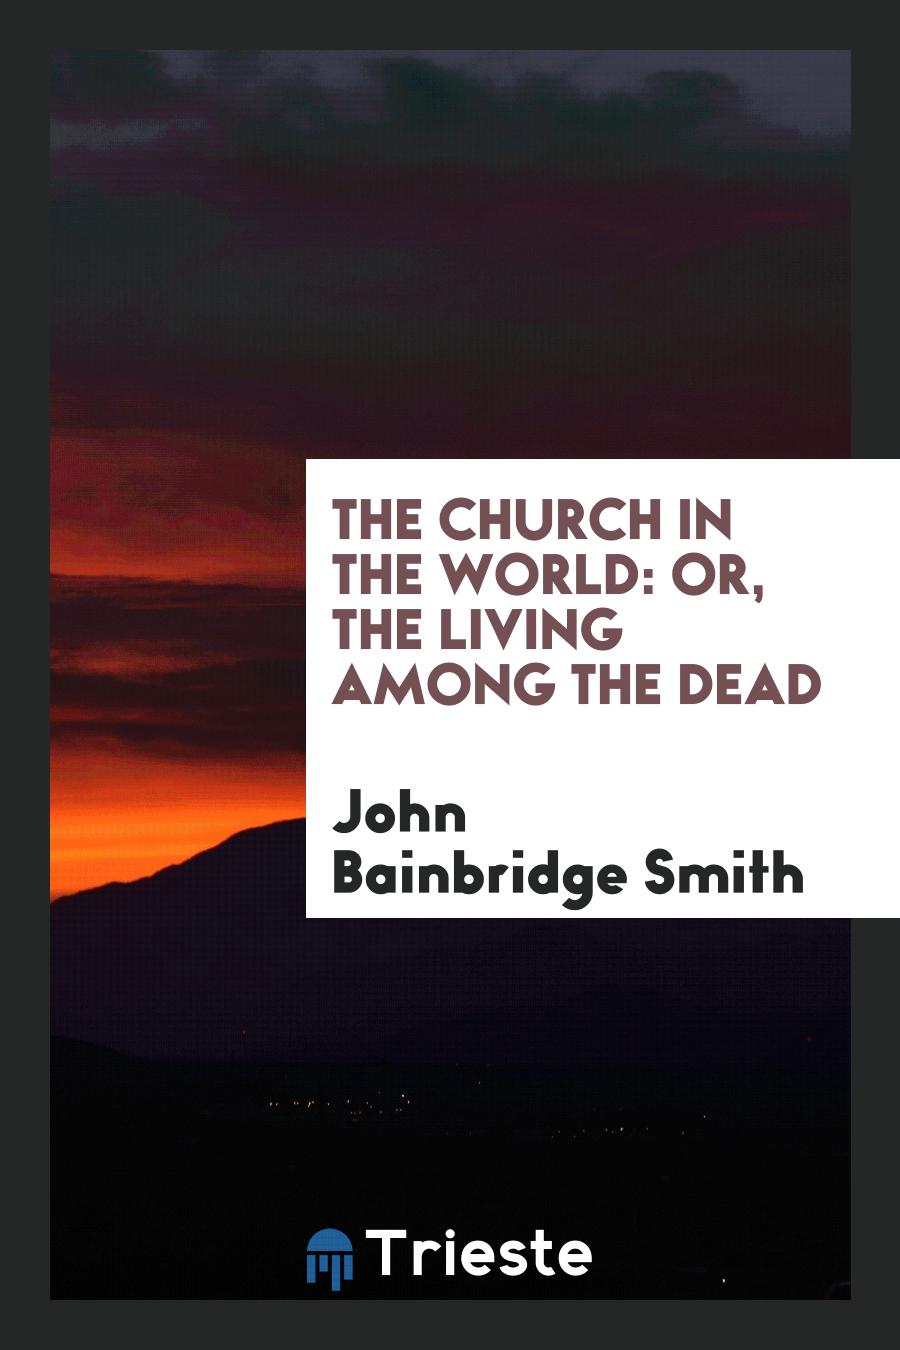 The Church in the World: Or, the Living among the Dead